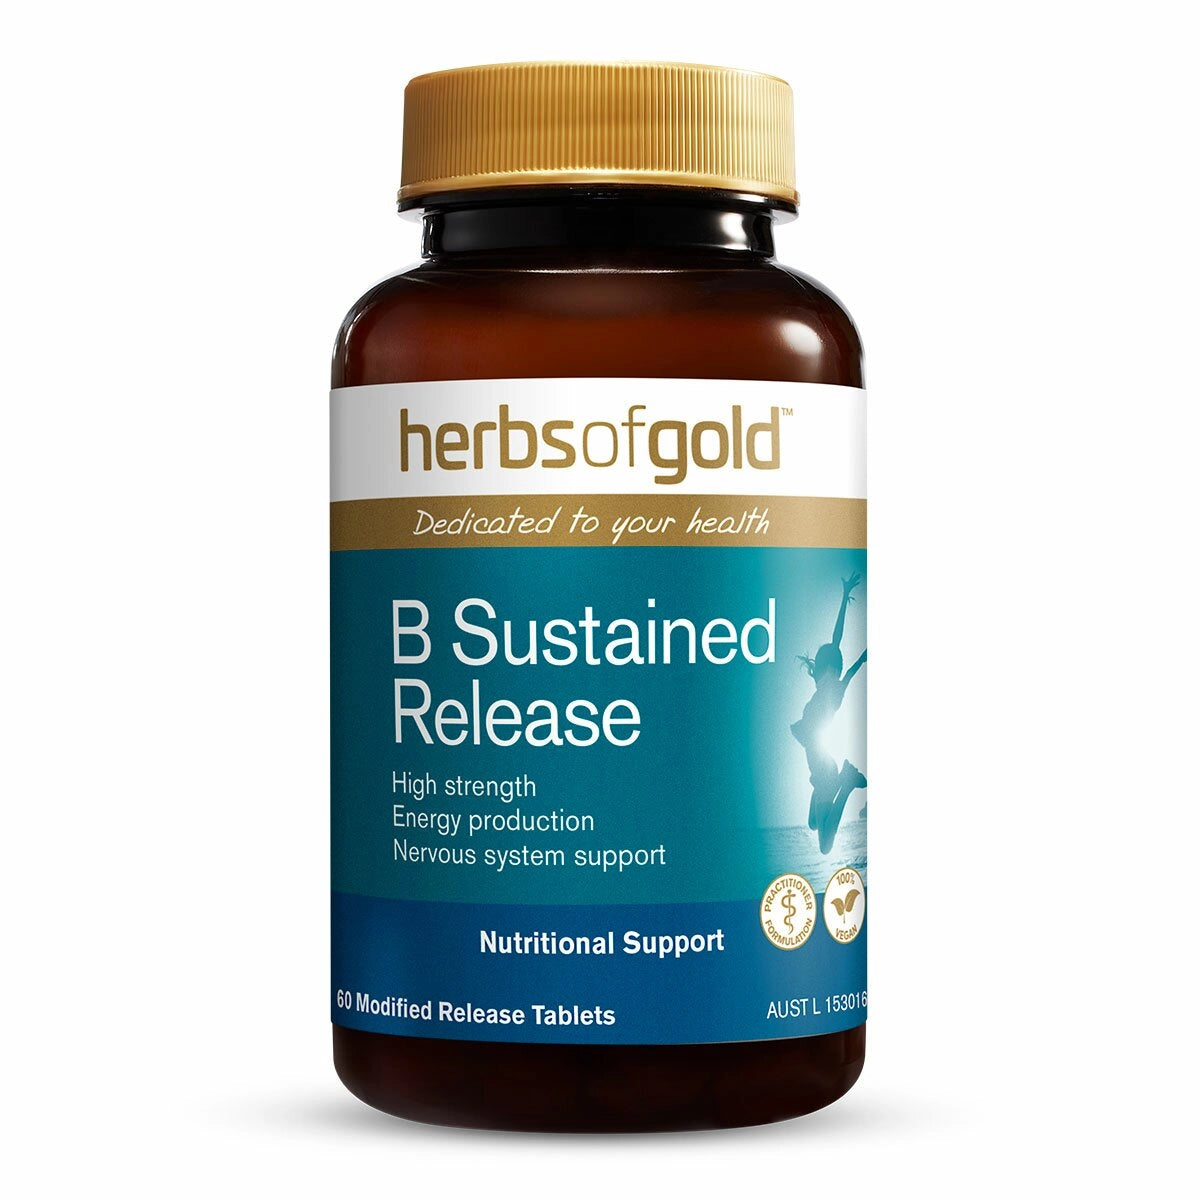 B Sustained Release Herbs of Gold